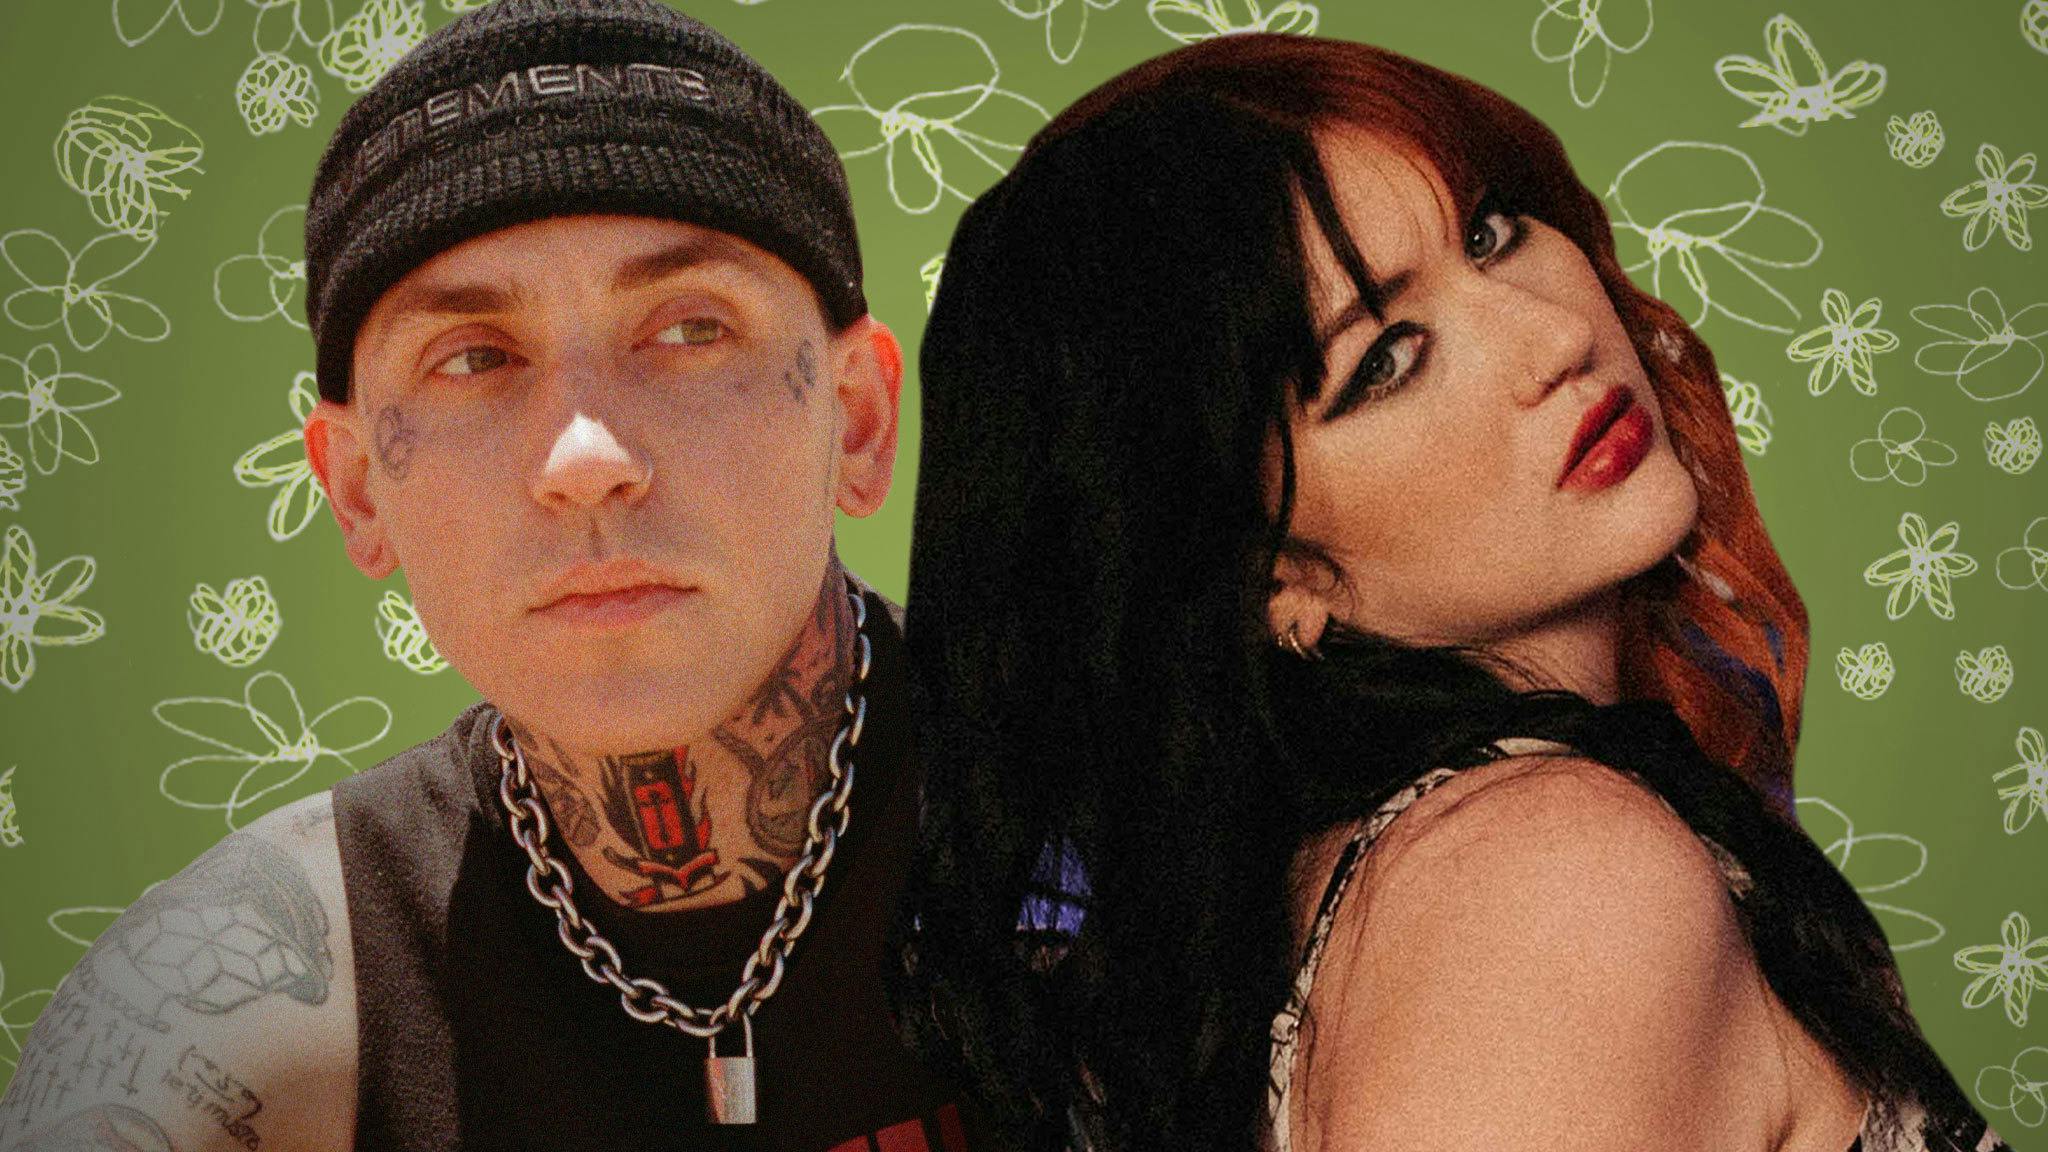 GAYLE and blackbear examine “the intensities of young love” on new single fmk